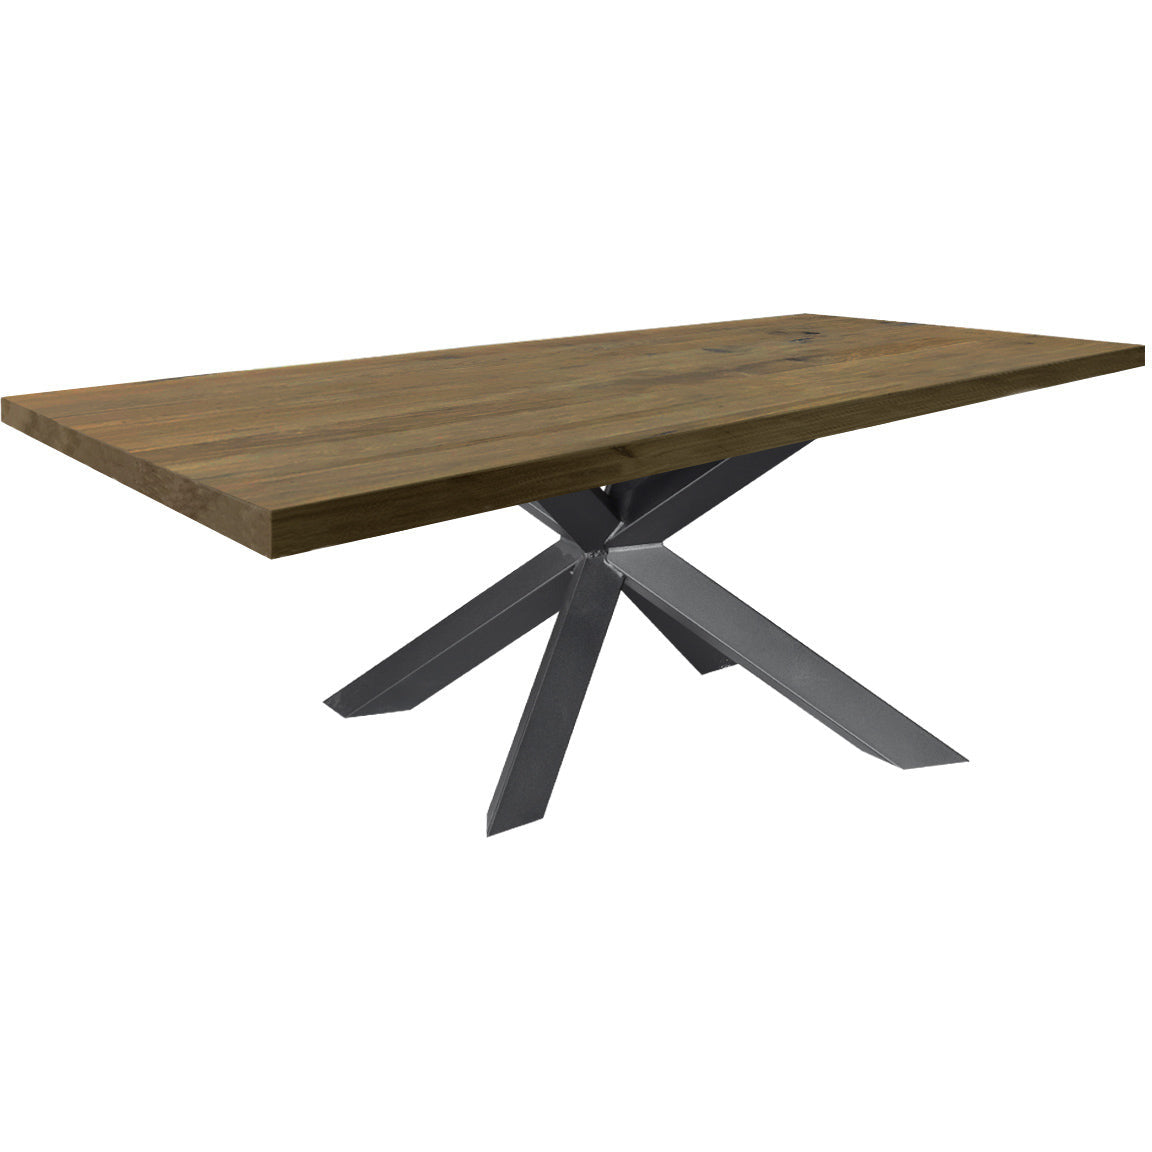 Dining table | Rectangle | Warm brown | Oak wood | Lacquered | Spiderpaw